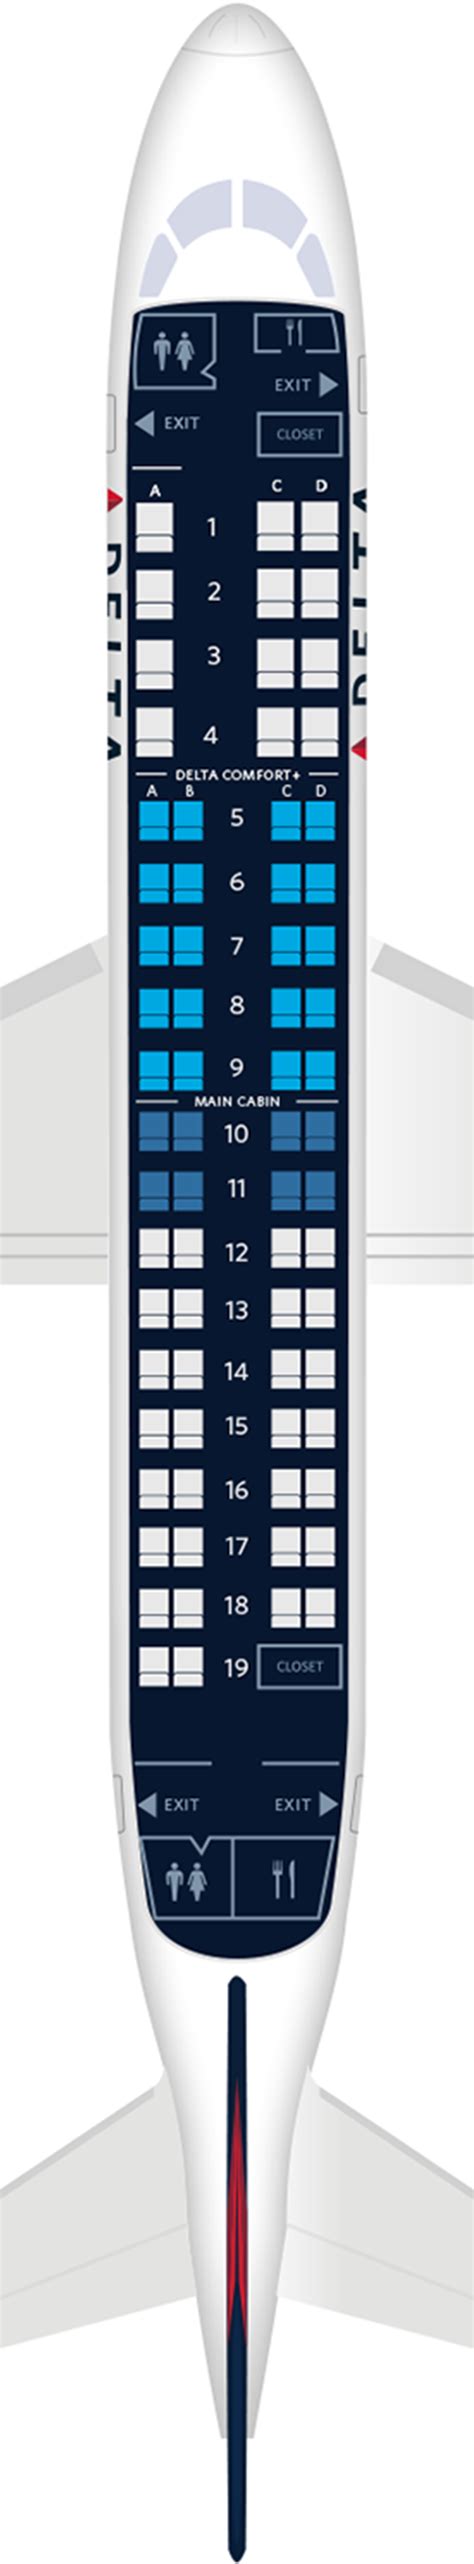 Embraer e 175 seat map. Yes. Detailed seat map KLM Embraer 175. Find the best airplanes seats, information on legroom, recline and in-flight entertainment using our detailed online seating charts. 